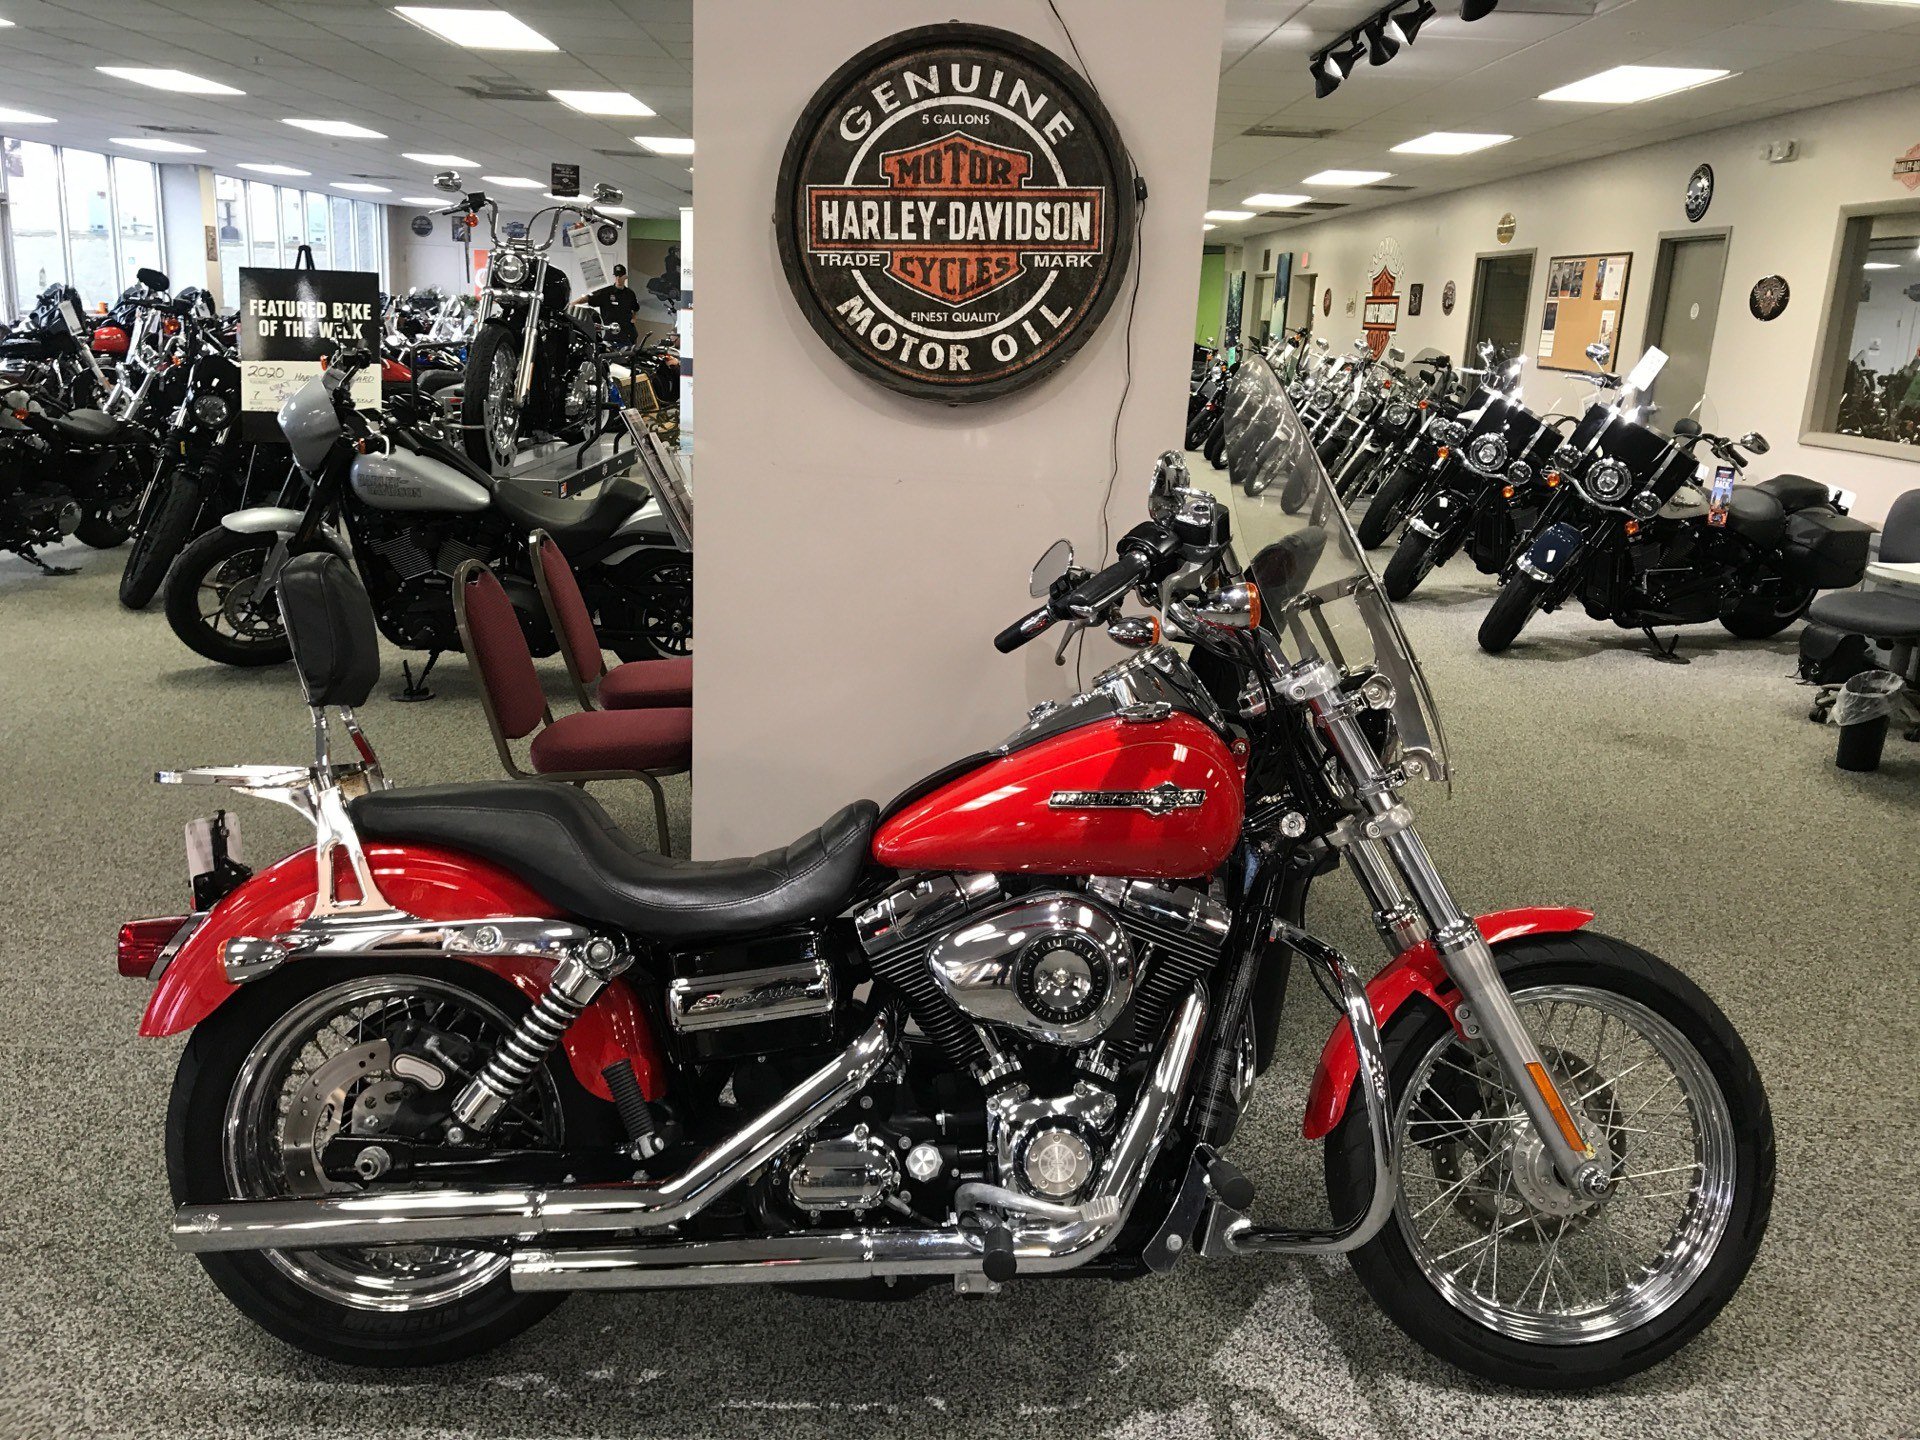 Used 2011 Harley Davidson Dyna Super Glide Custom Scarlet Red Motorcycles In Knoxville Tn 332078